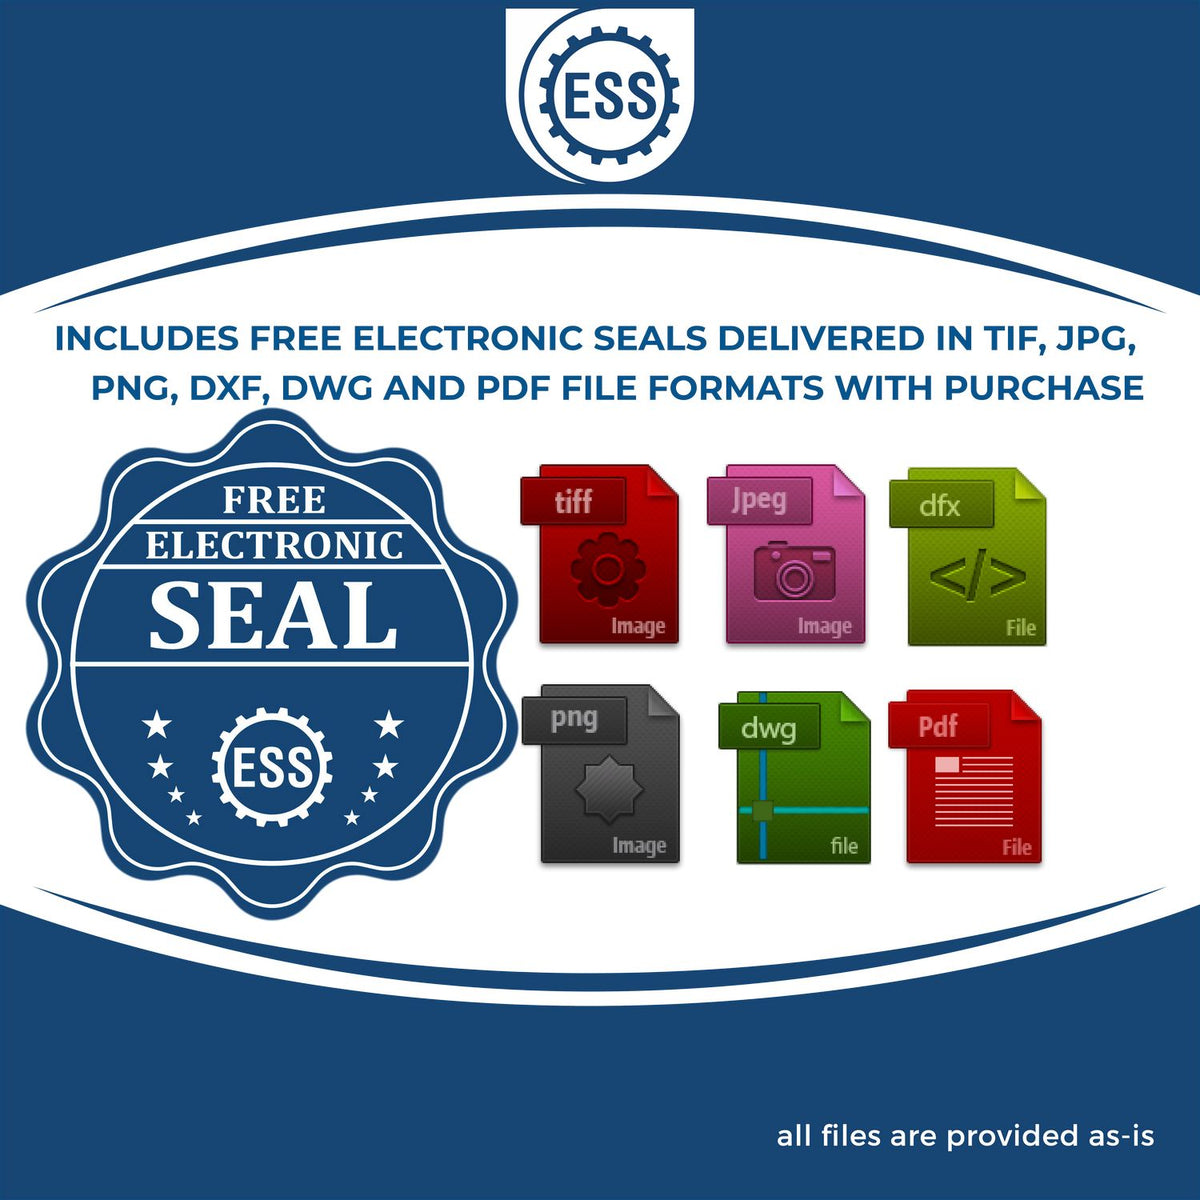 An infographic for the free electronic seal for the Wooden Handle New Hampshire State Seal Notary Public Stamp illustrating the different file type icons such as DXF, DWG, TIF, JPG and PNG.